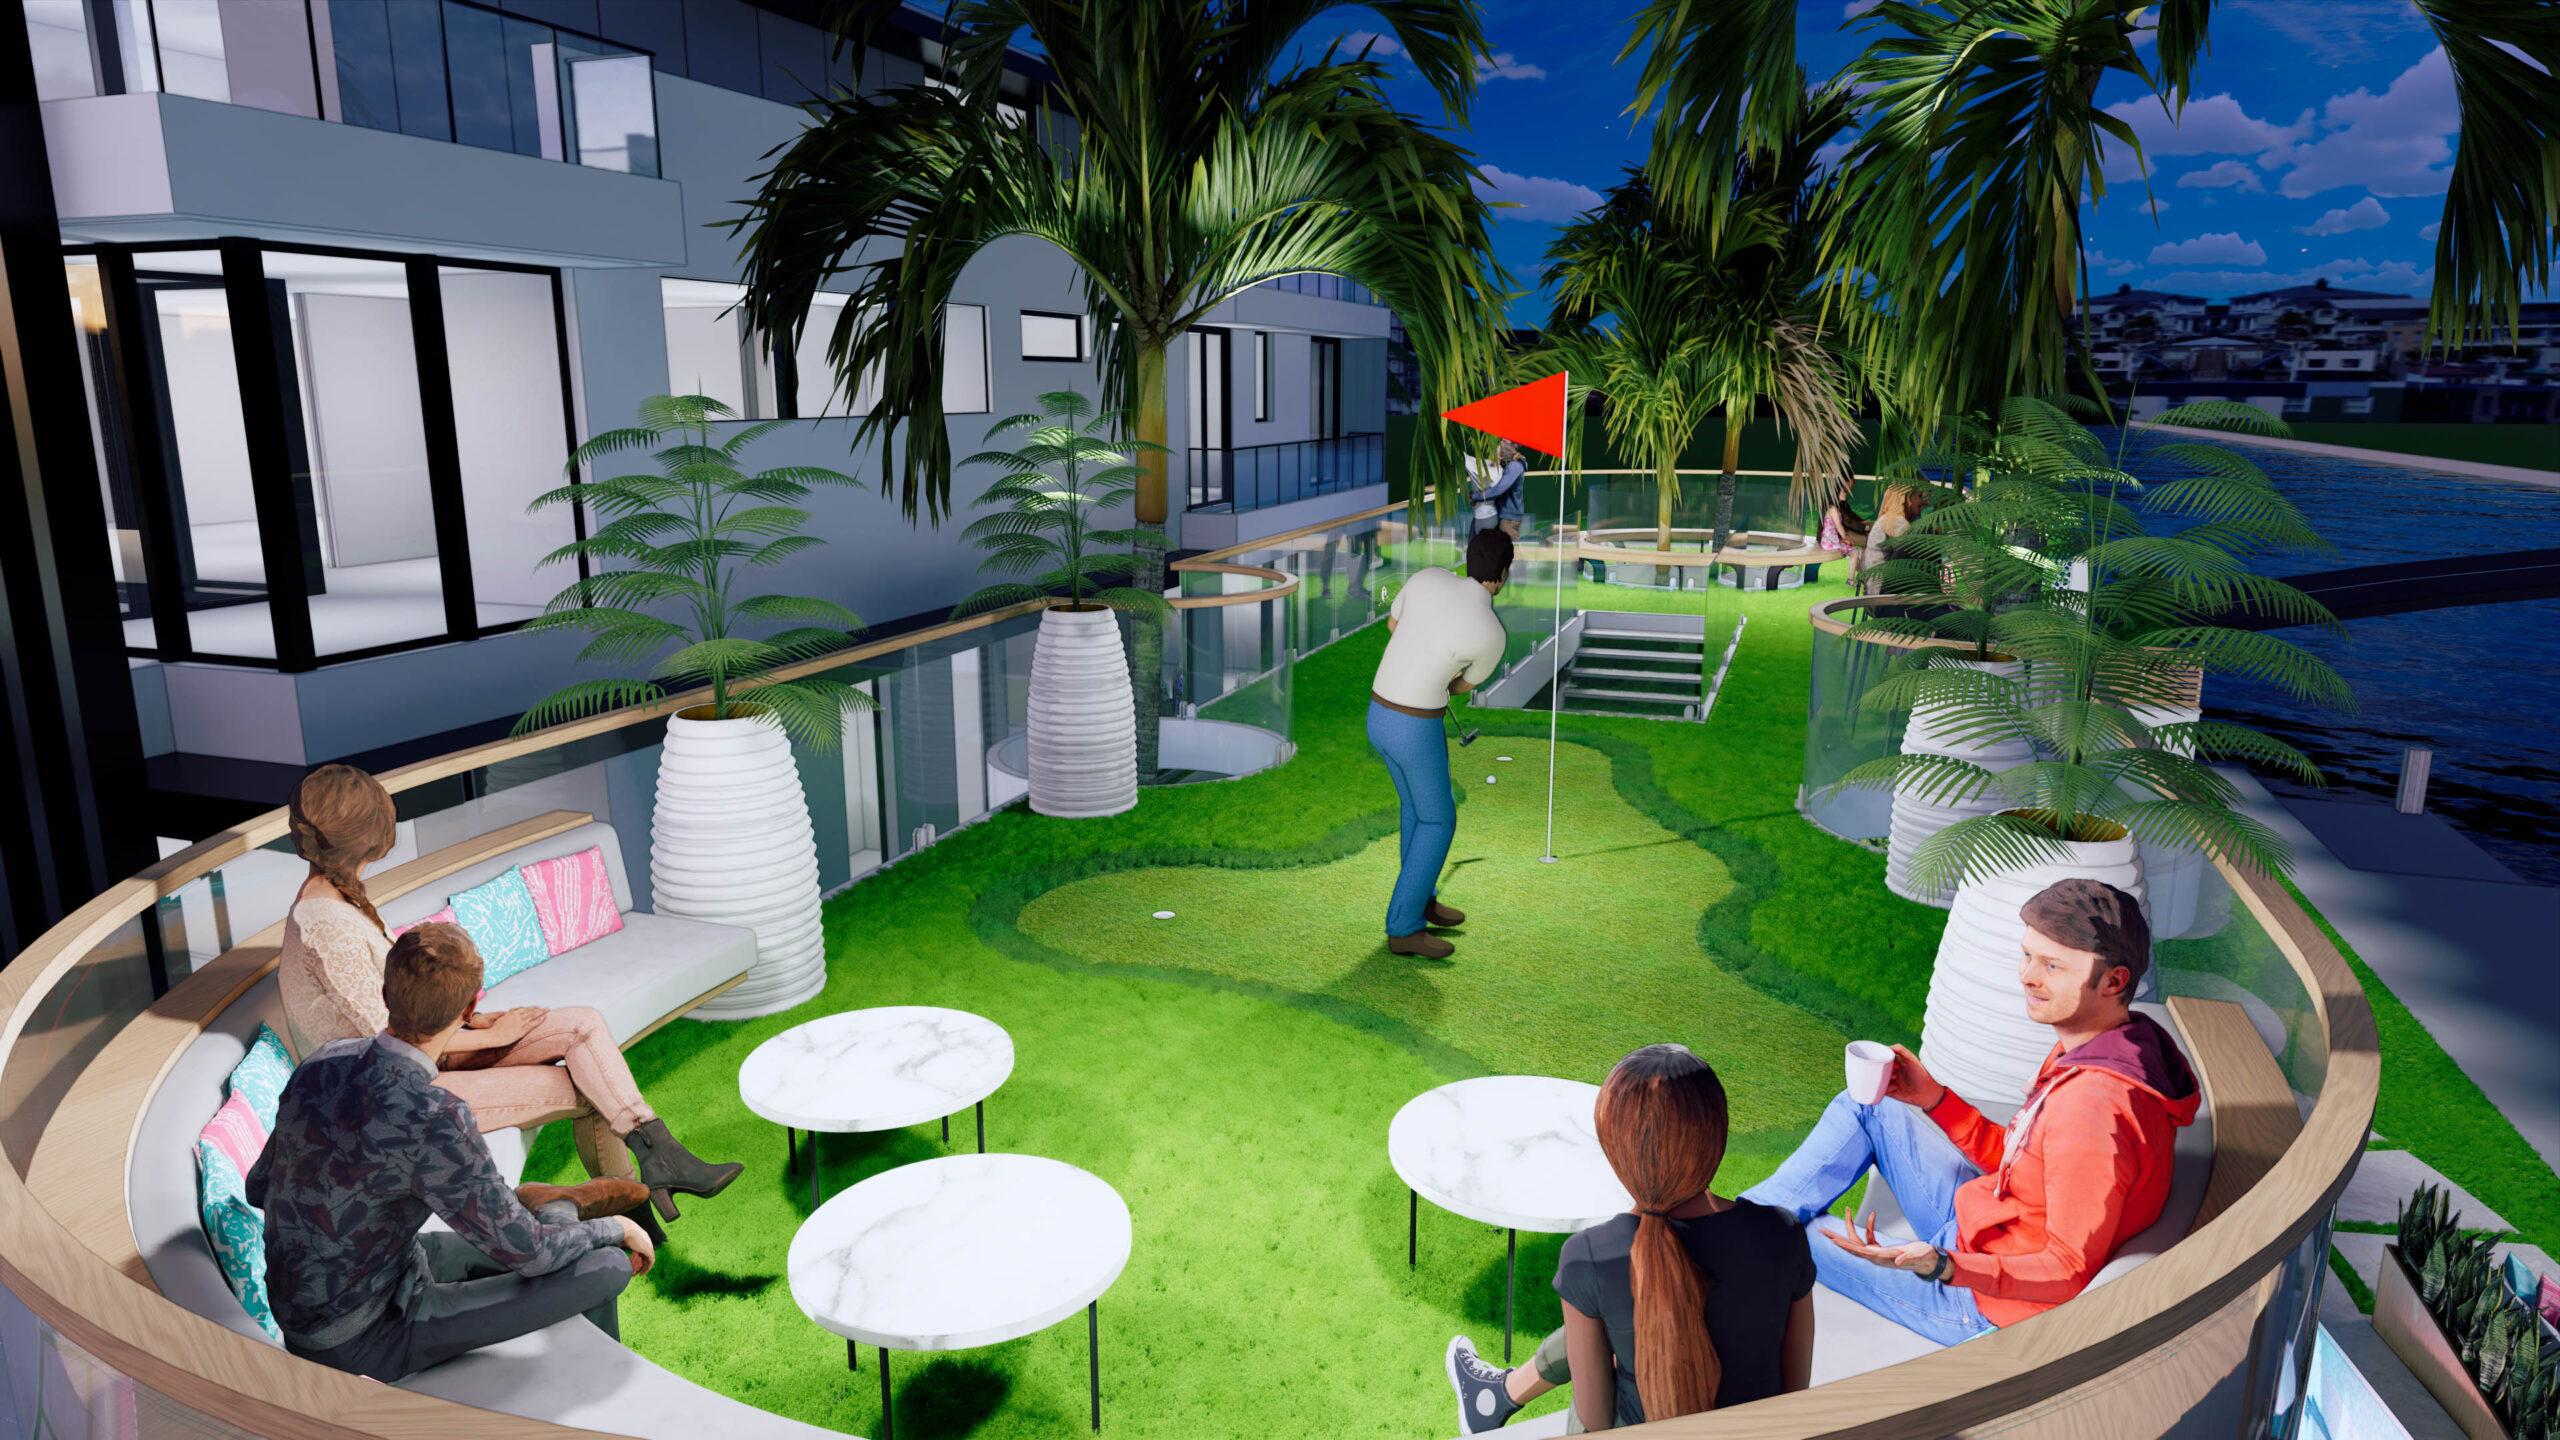 Putting Green. Brad Holley's Million Dollar Pool Design Challenge winning rendering. Courtesy of Brad Holley and Pure Design.